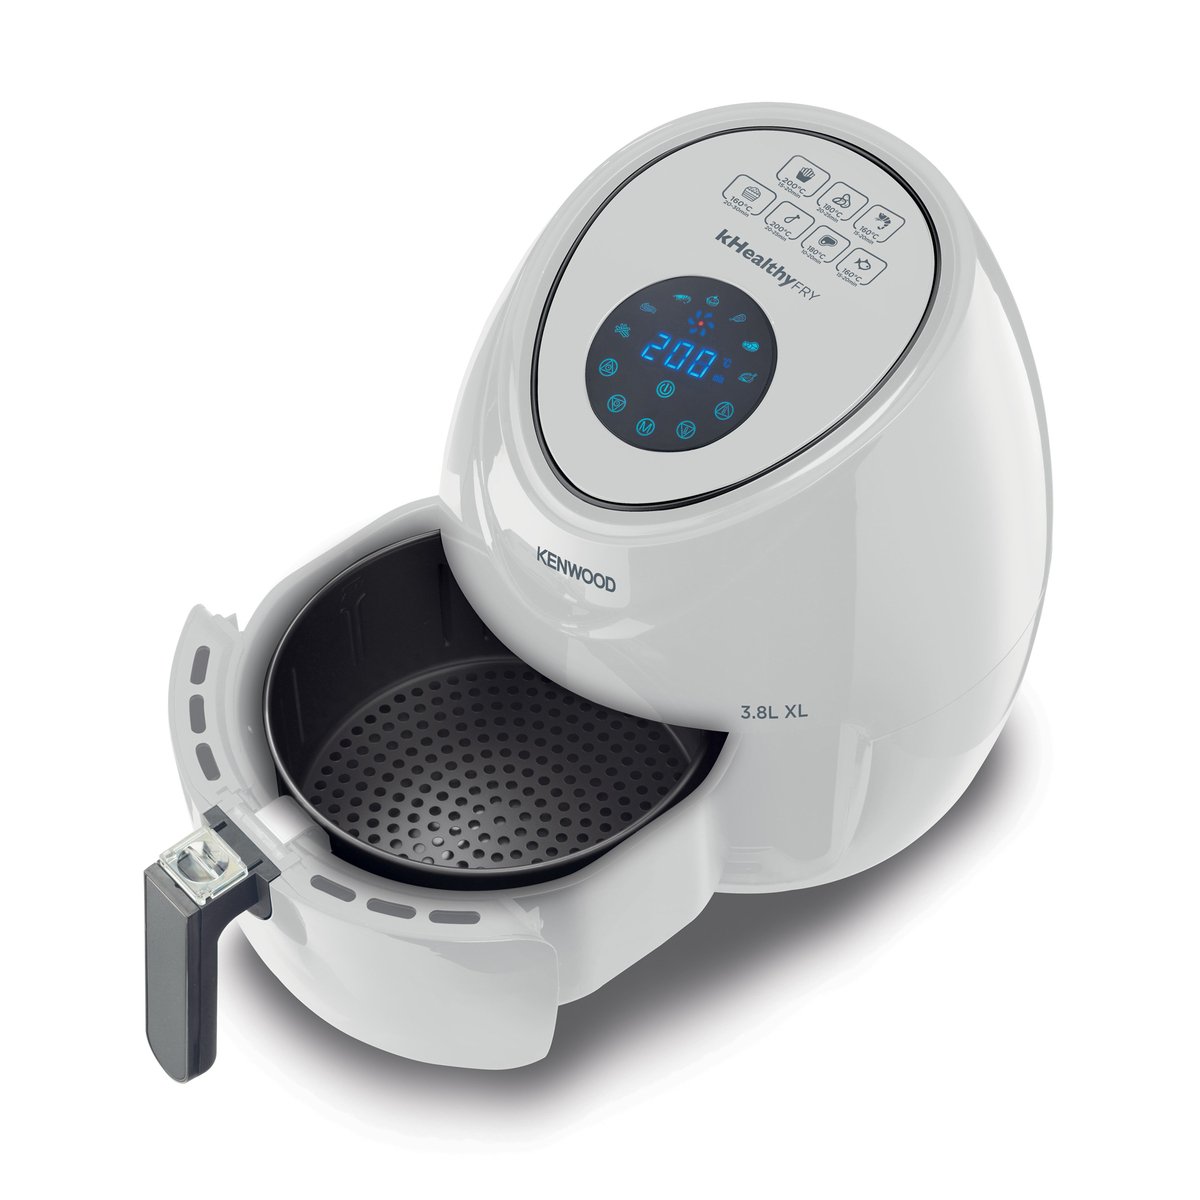 Kenwood Airfryer Large 3.8LTR/1.74kg Capacity- White - HFP30.000WH